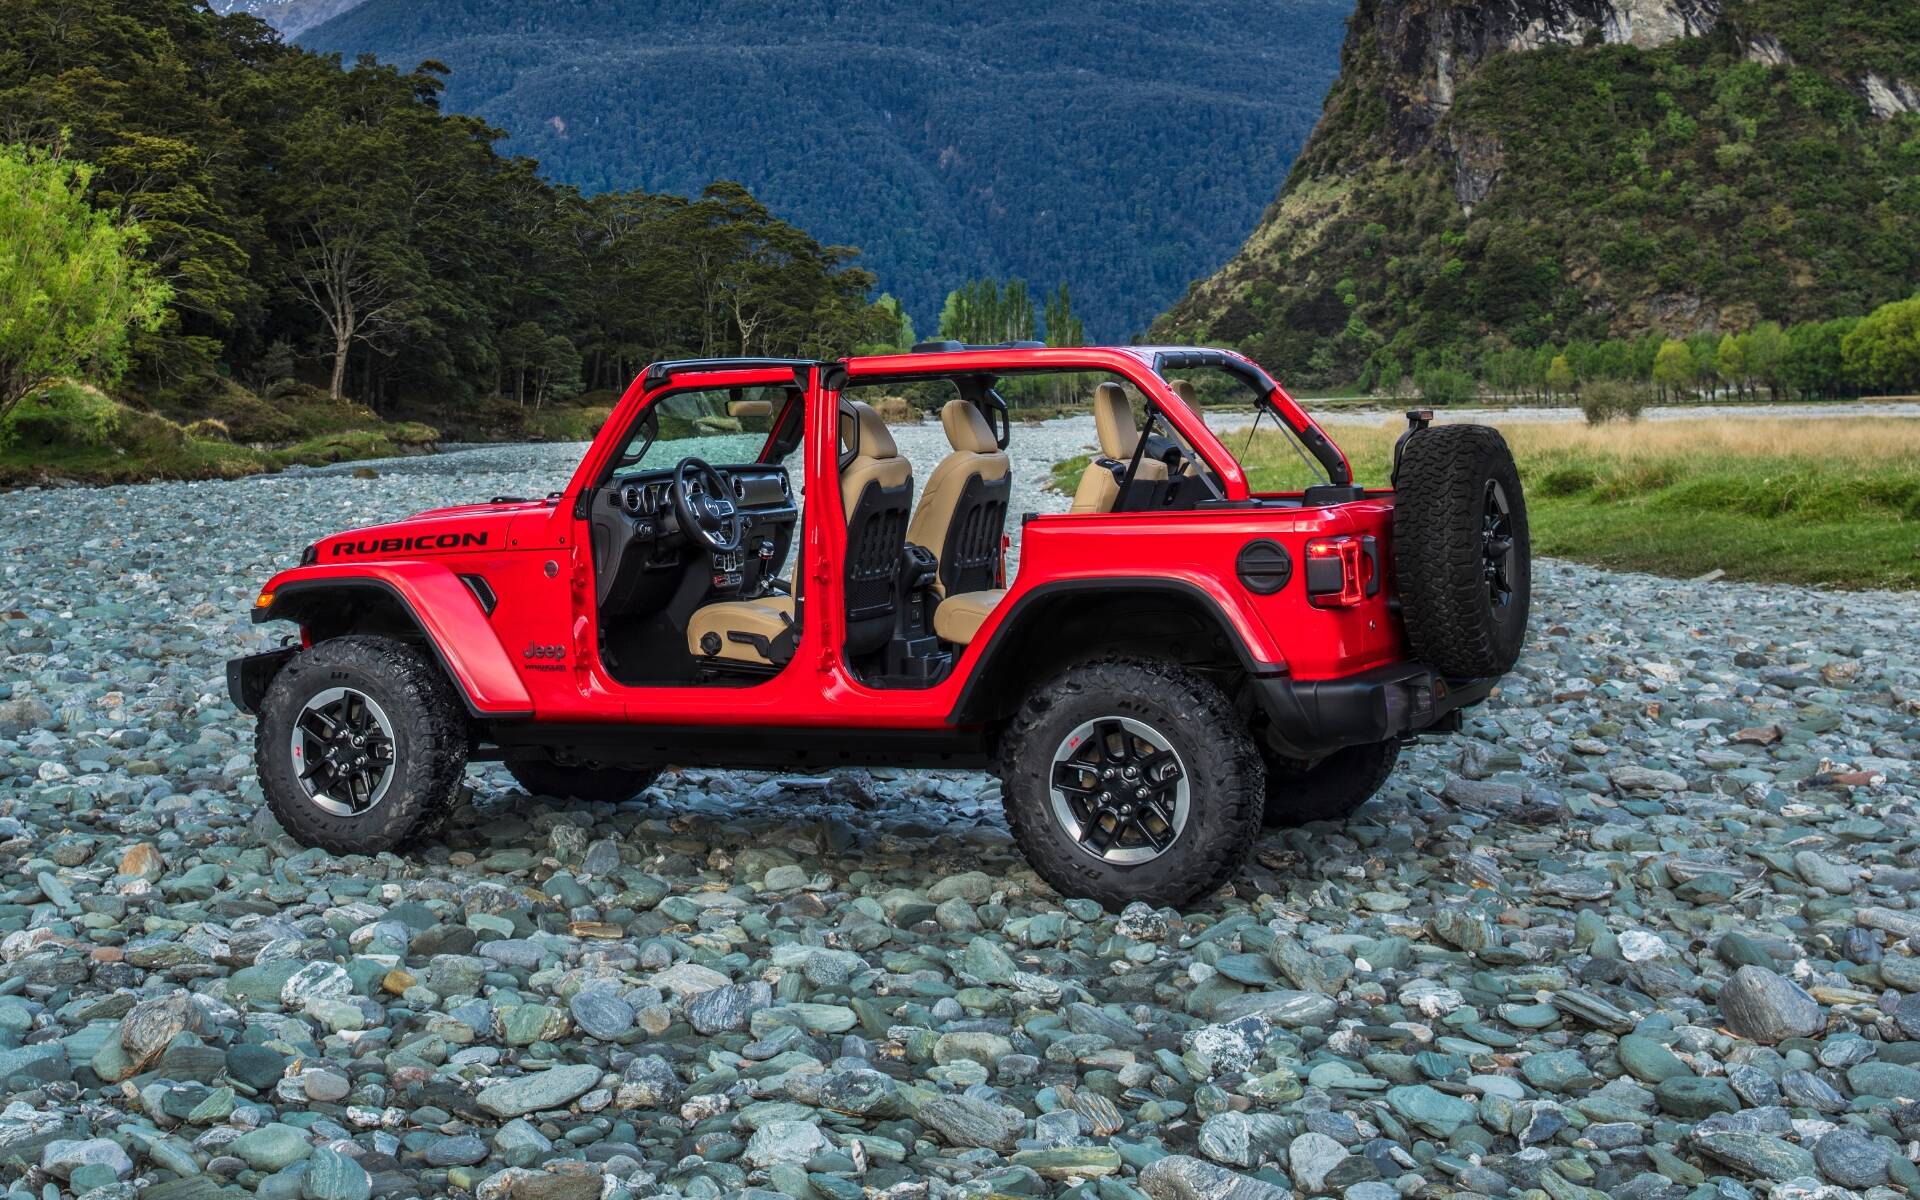 How Do Removable Doors Work On the Jeep Wrangler? - 4/8